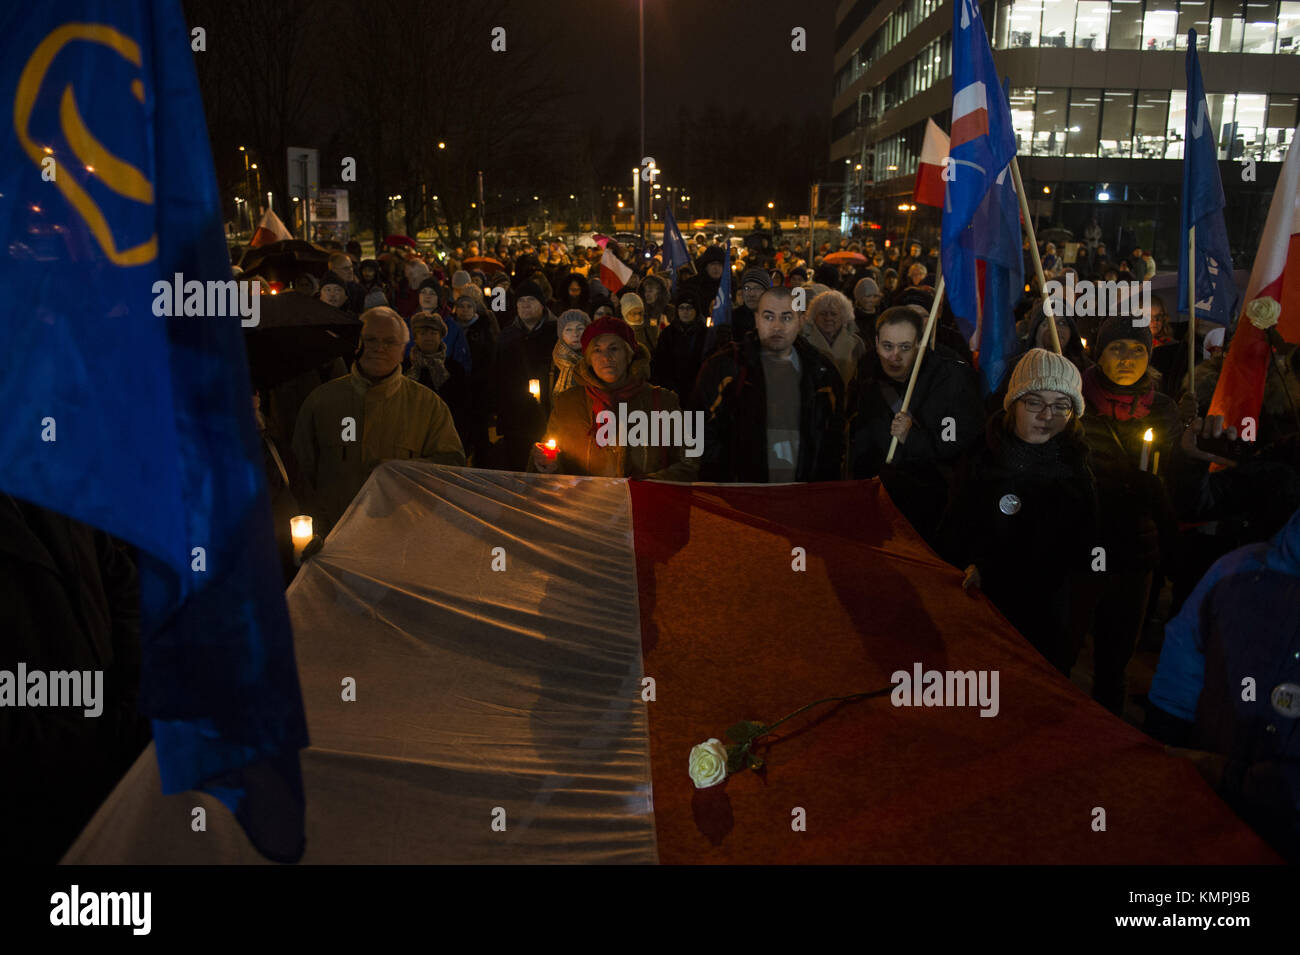 Krakow, Poland. 8th Dec, 2017. People gather in front of Krakow Court while holding a large polish flag to protest against the new judicial reforms. Today, The Polish parliament approved the government proposals to hand the ruling Law and Justice party (PiS) total control of judicial appointments and the supreme court. Credit: Omar Marques/SOPA/ZUMA Wire/Alamy Live News Stock Photo